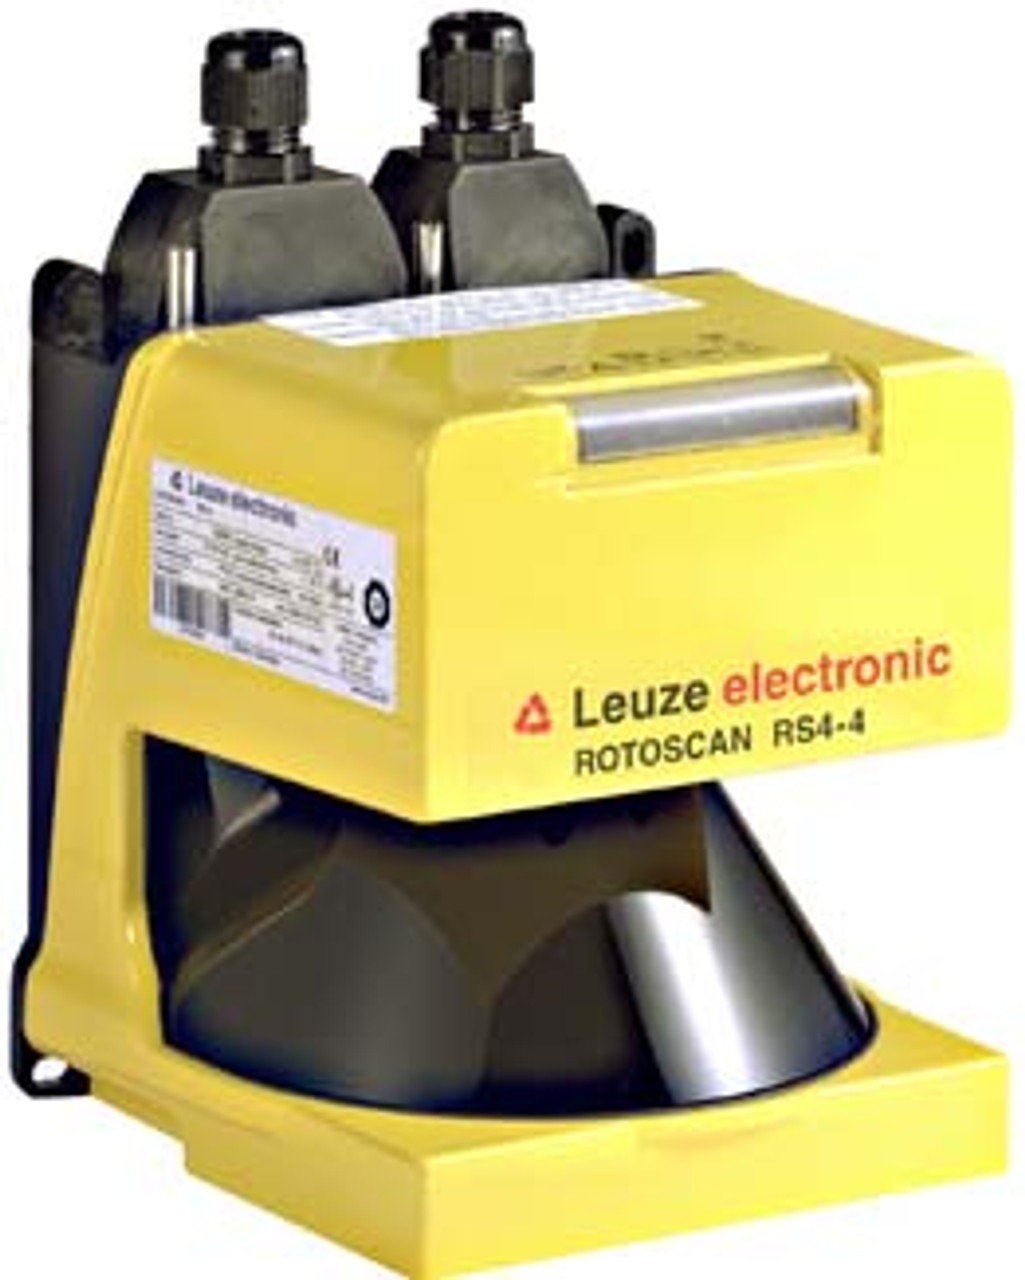 RS4-4 Lenze